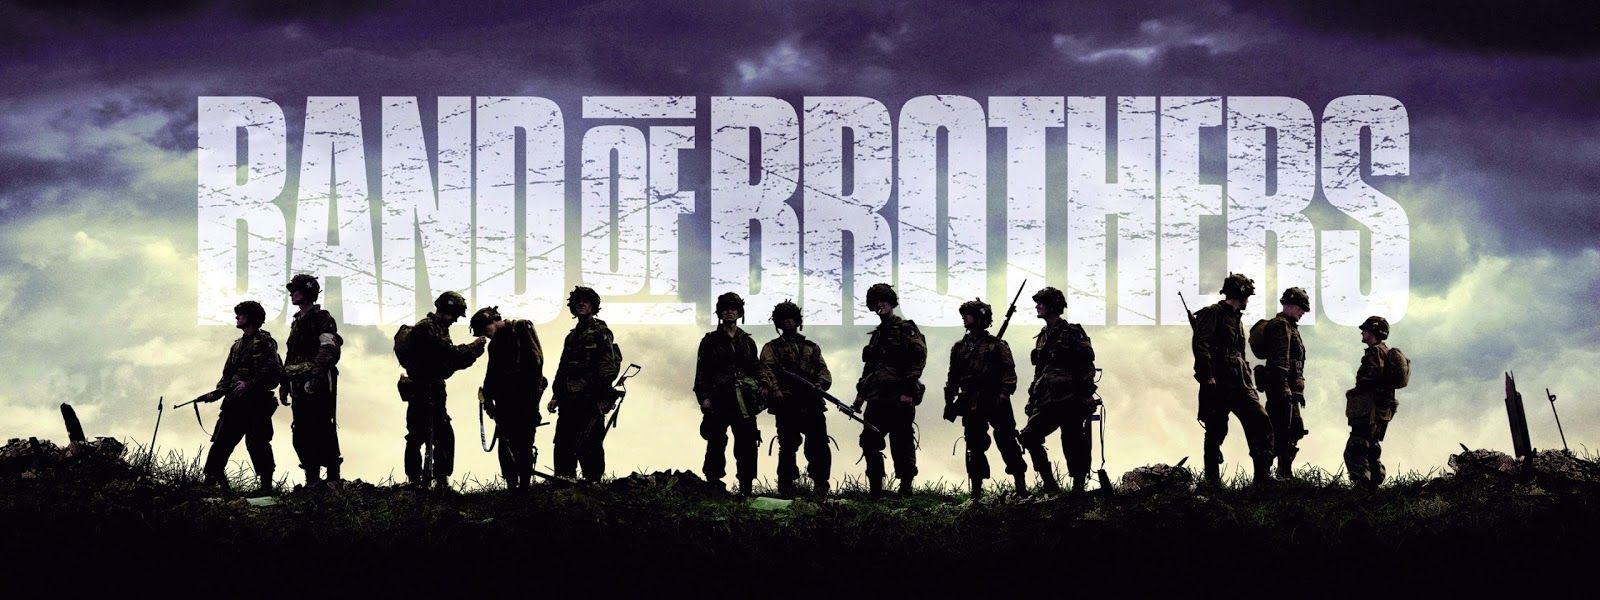 Band of Brothers Logo - Critics At Large : A Parting Glance of War: HBO's Band of Brothers